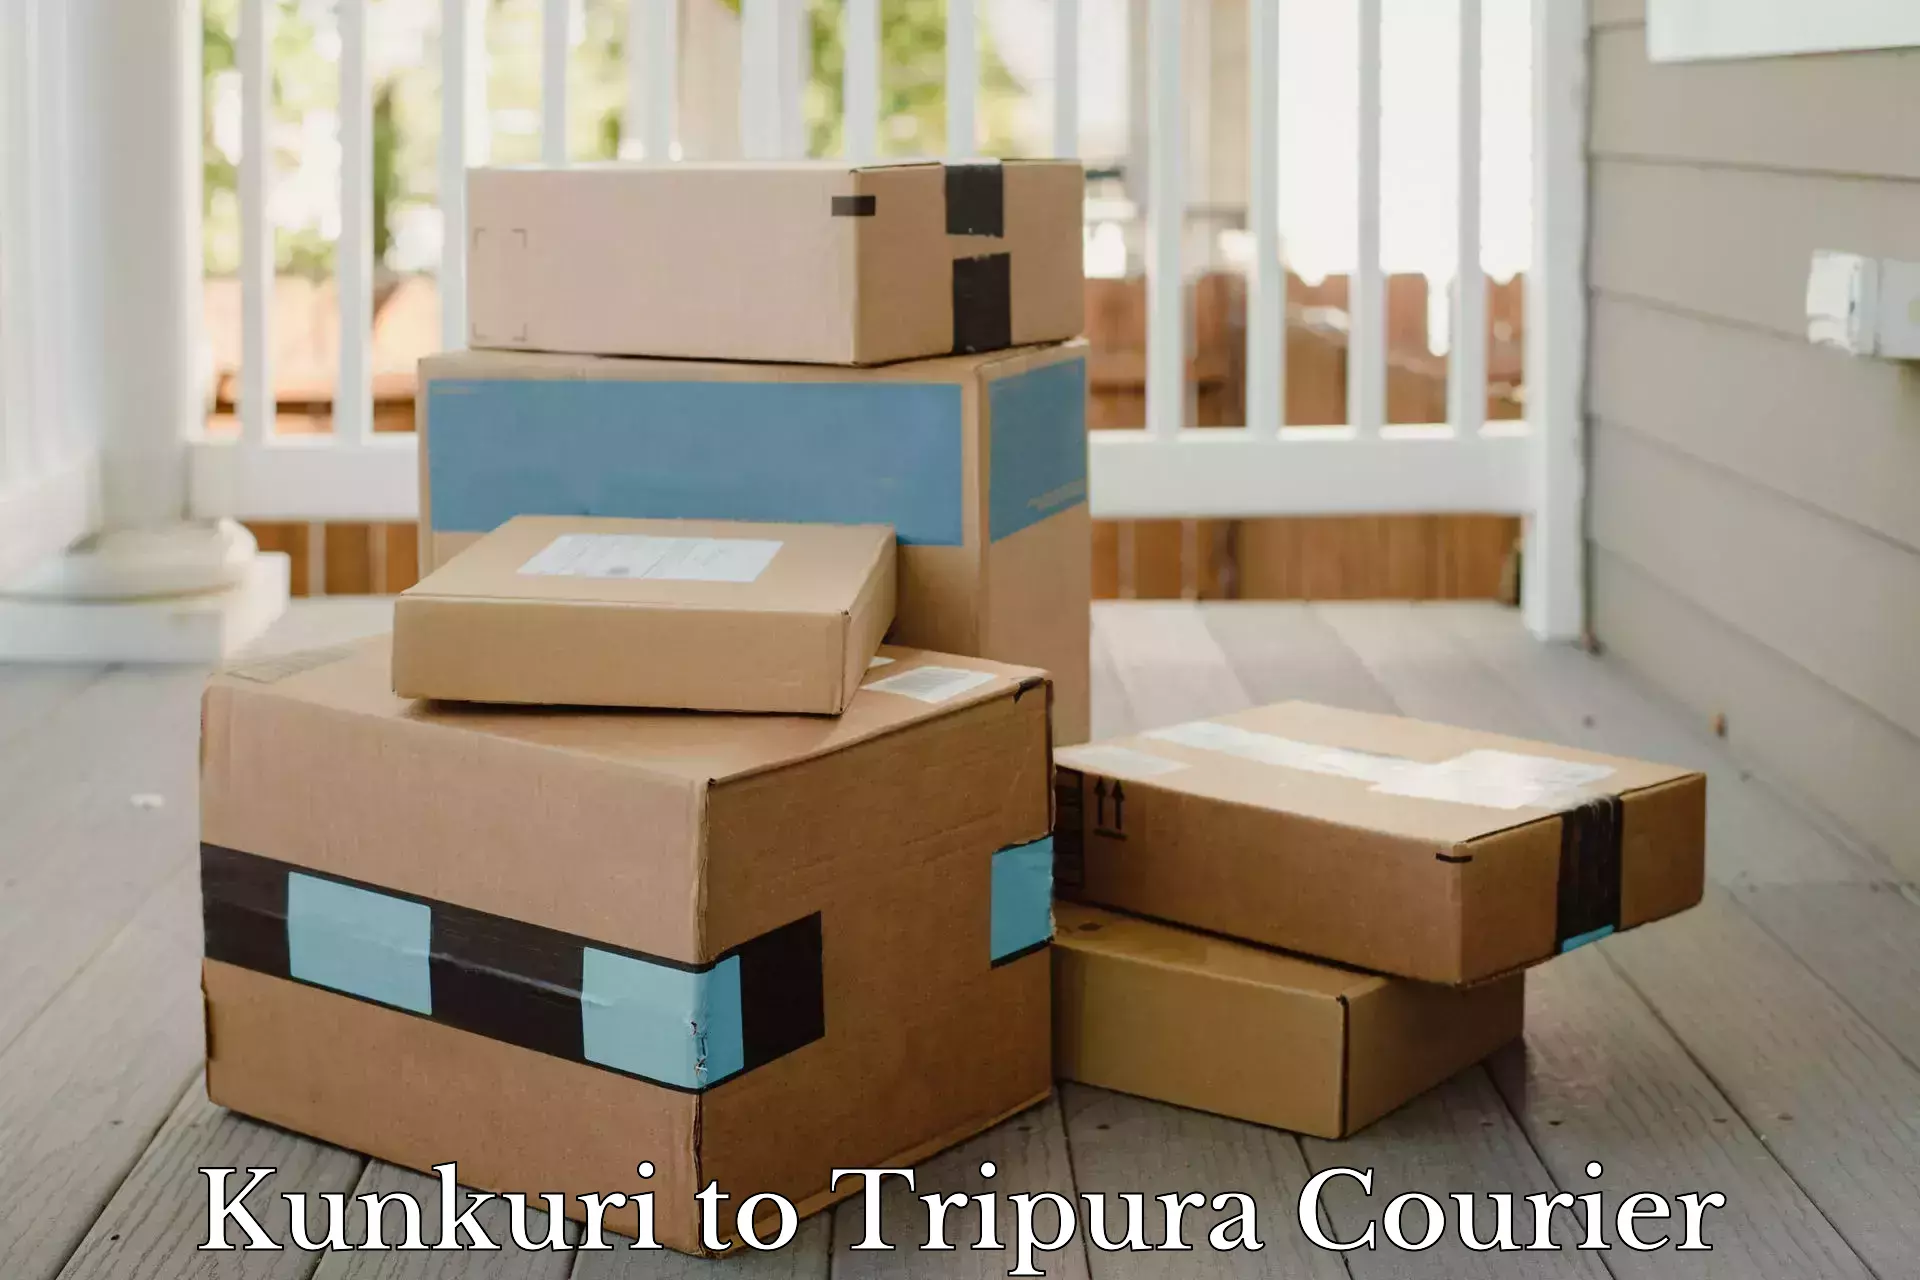 Flexible delivery schedules Kunkuri to Udaipur Tripura